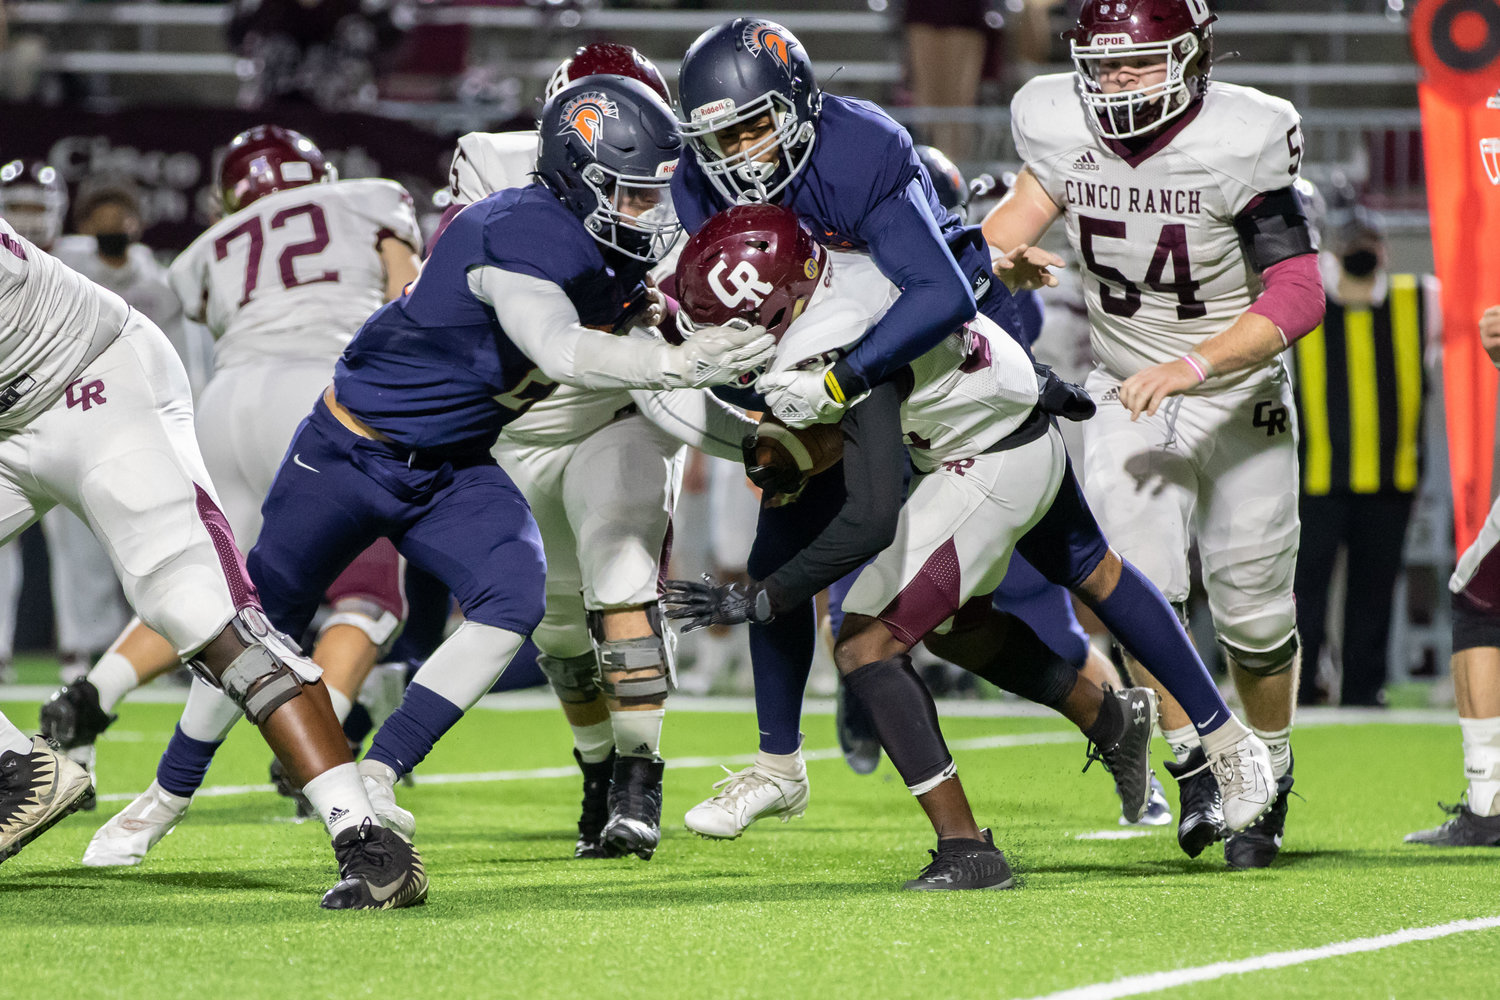 Seven Lakes defenders take down a Cinco Ranch ballcarrier during the Spartans' win over Cinco Ranch on Dec. 4 at Legacy Stadium.